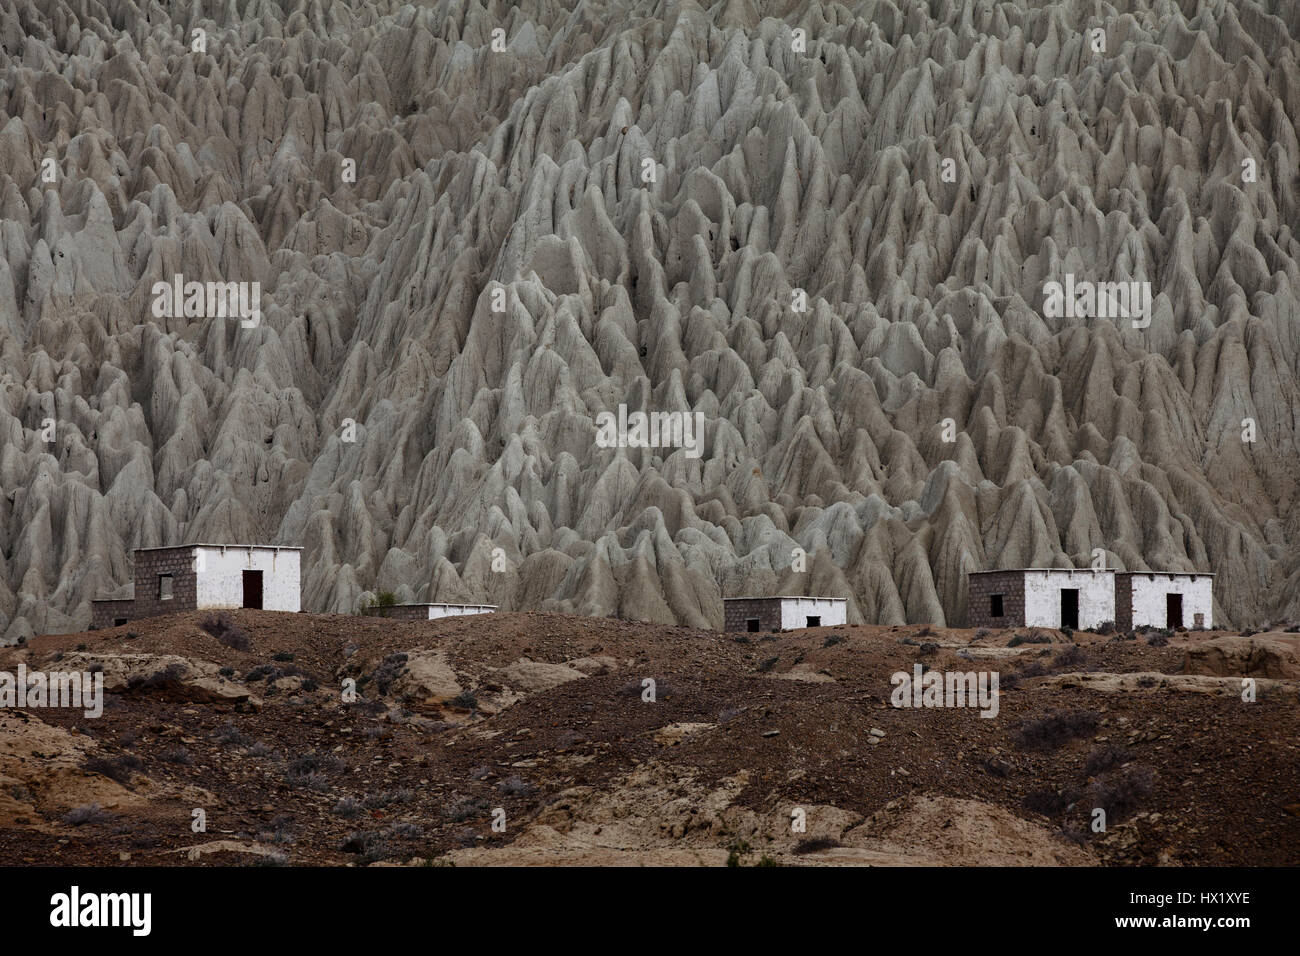 Small village houses in typical geography of Balochistan, Pakistan Stock Photo